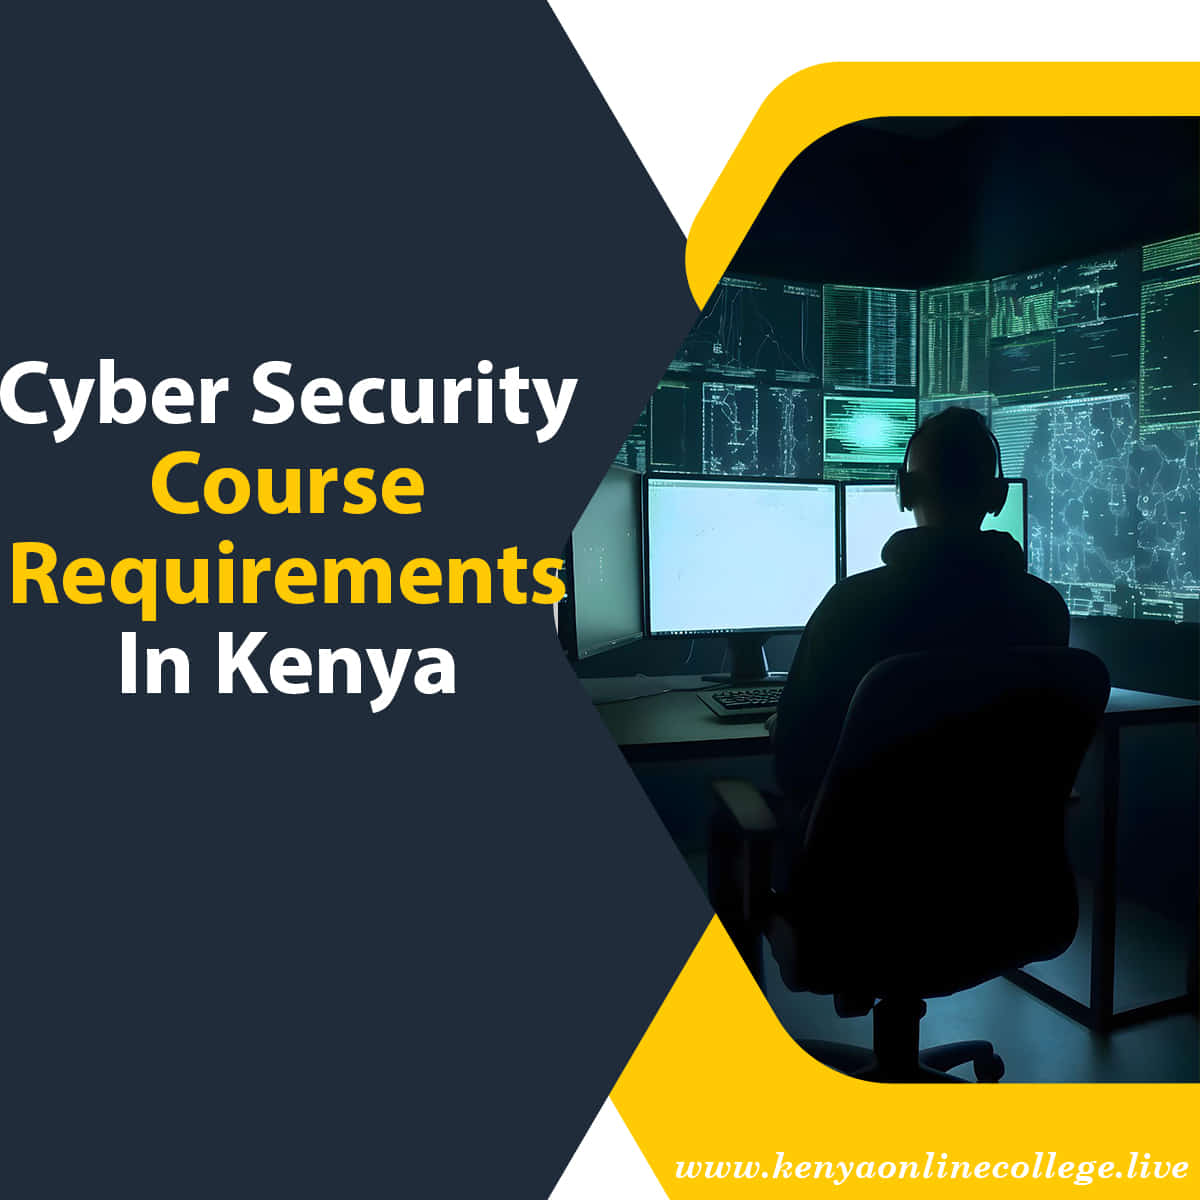 Cyber security course requirements in Kenya